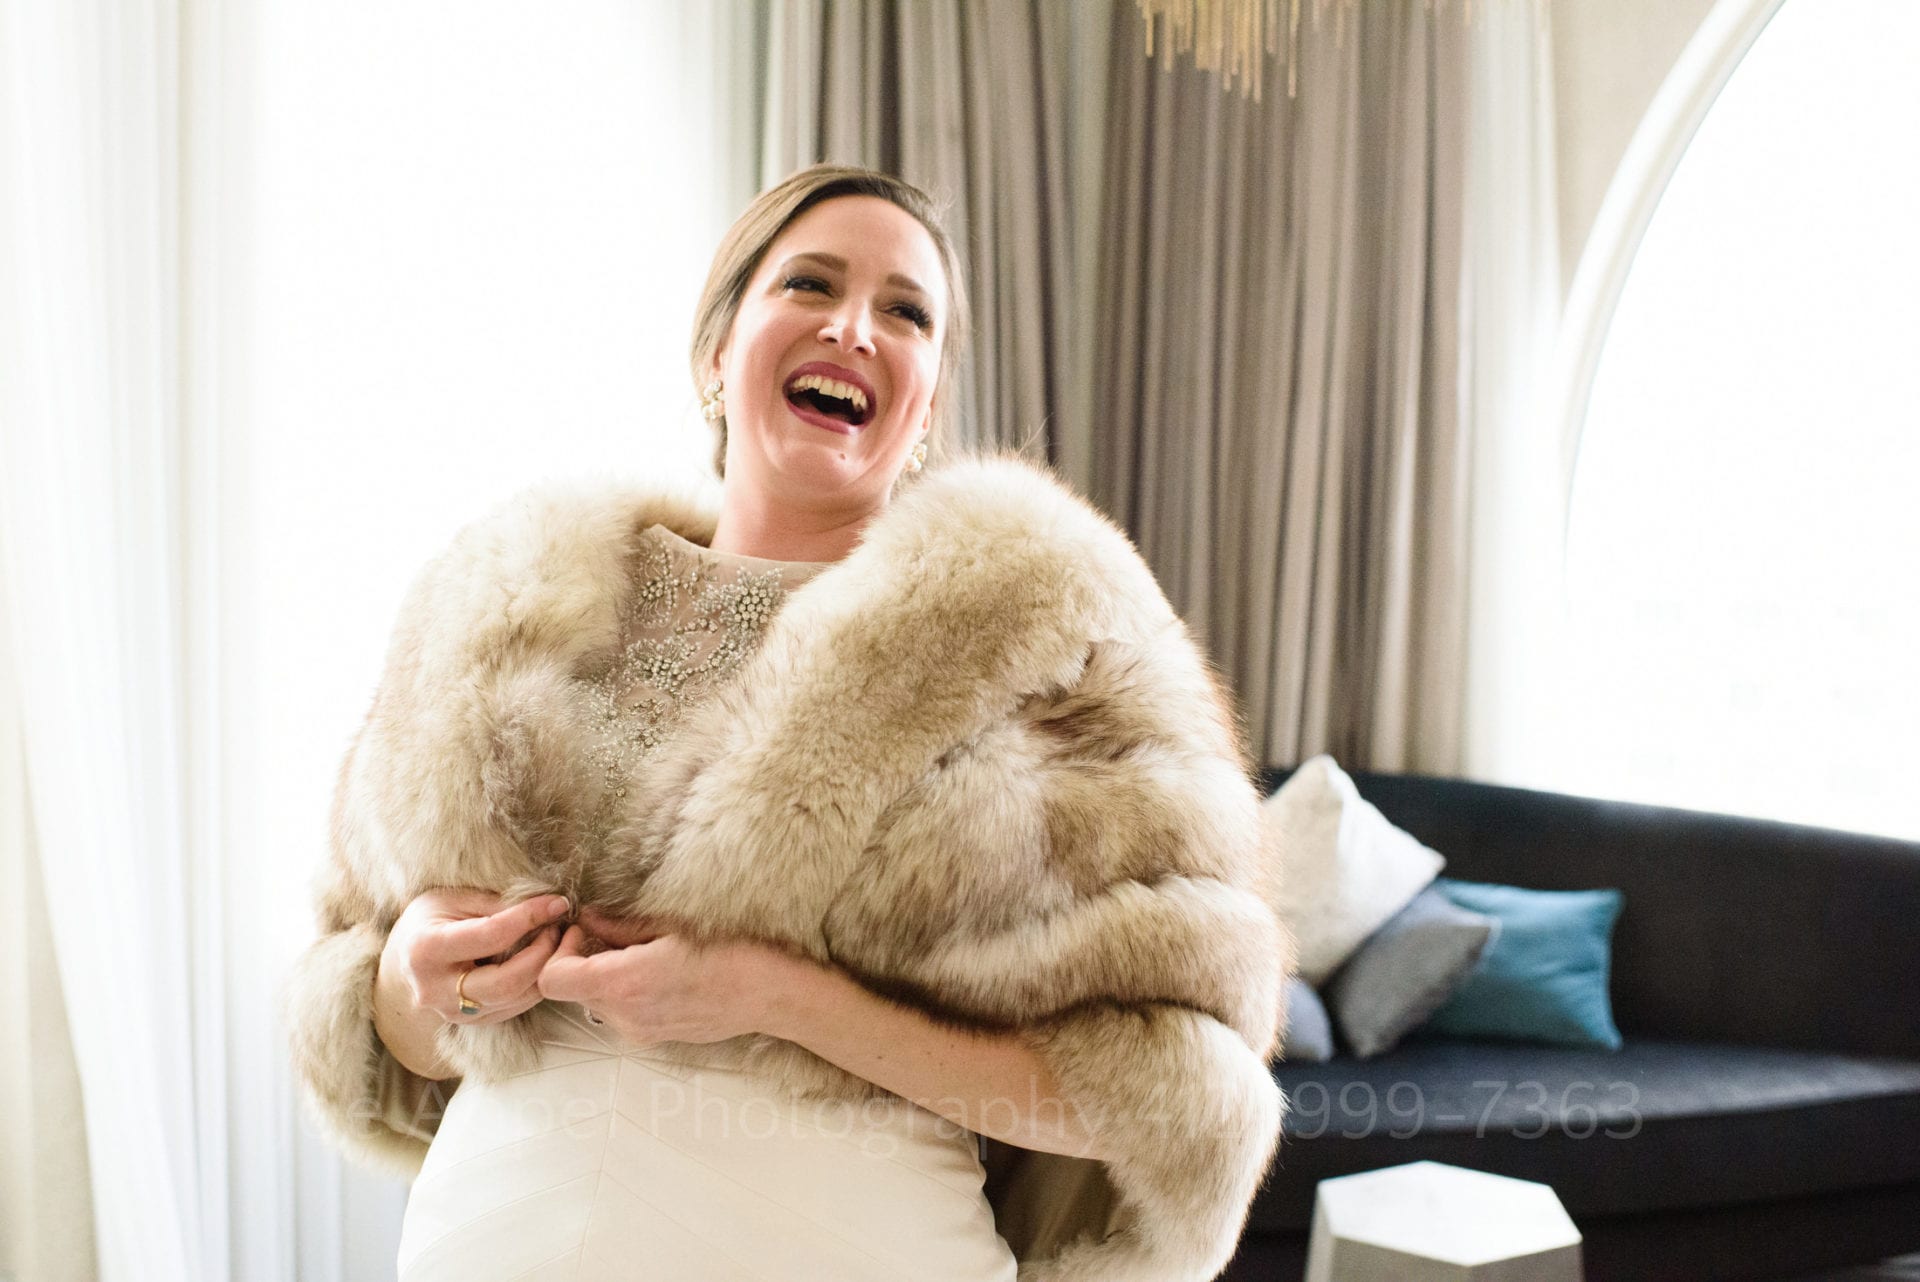 A bride laughs as she buttons her fur stole while standing in a brightly lit hotel room.